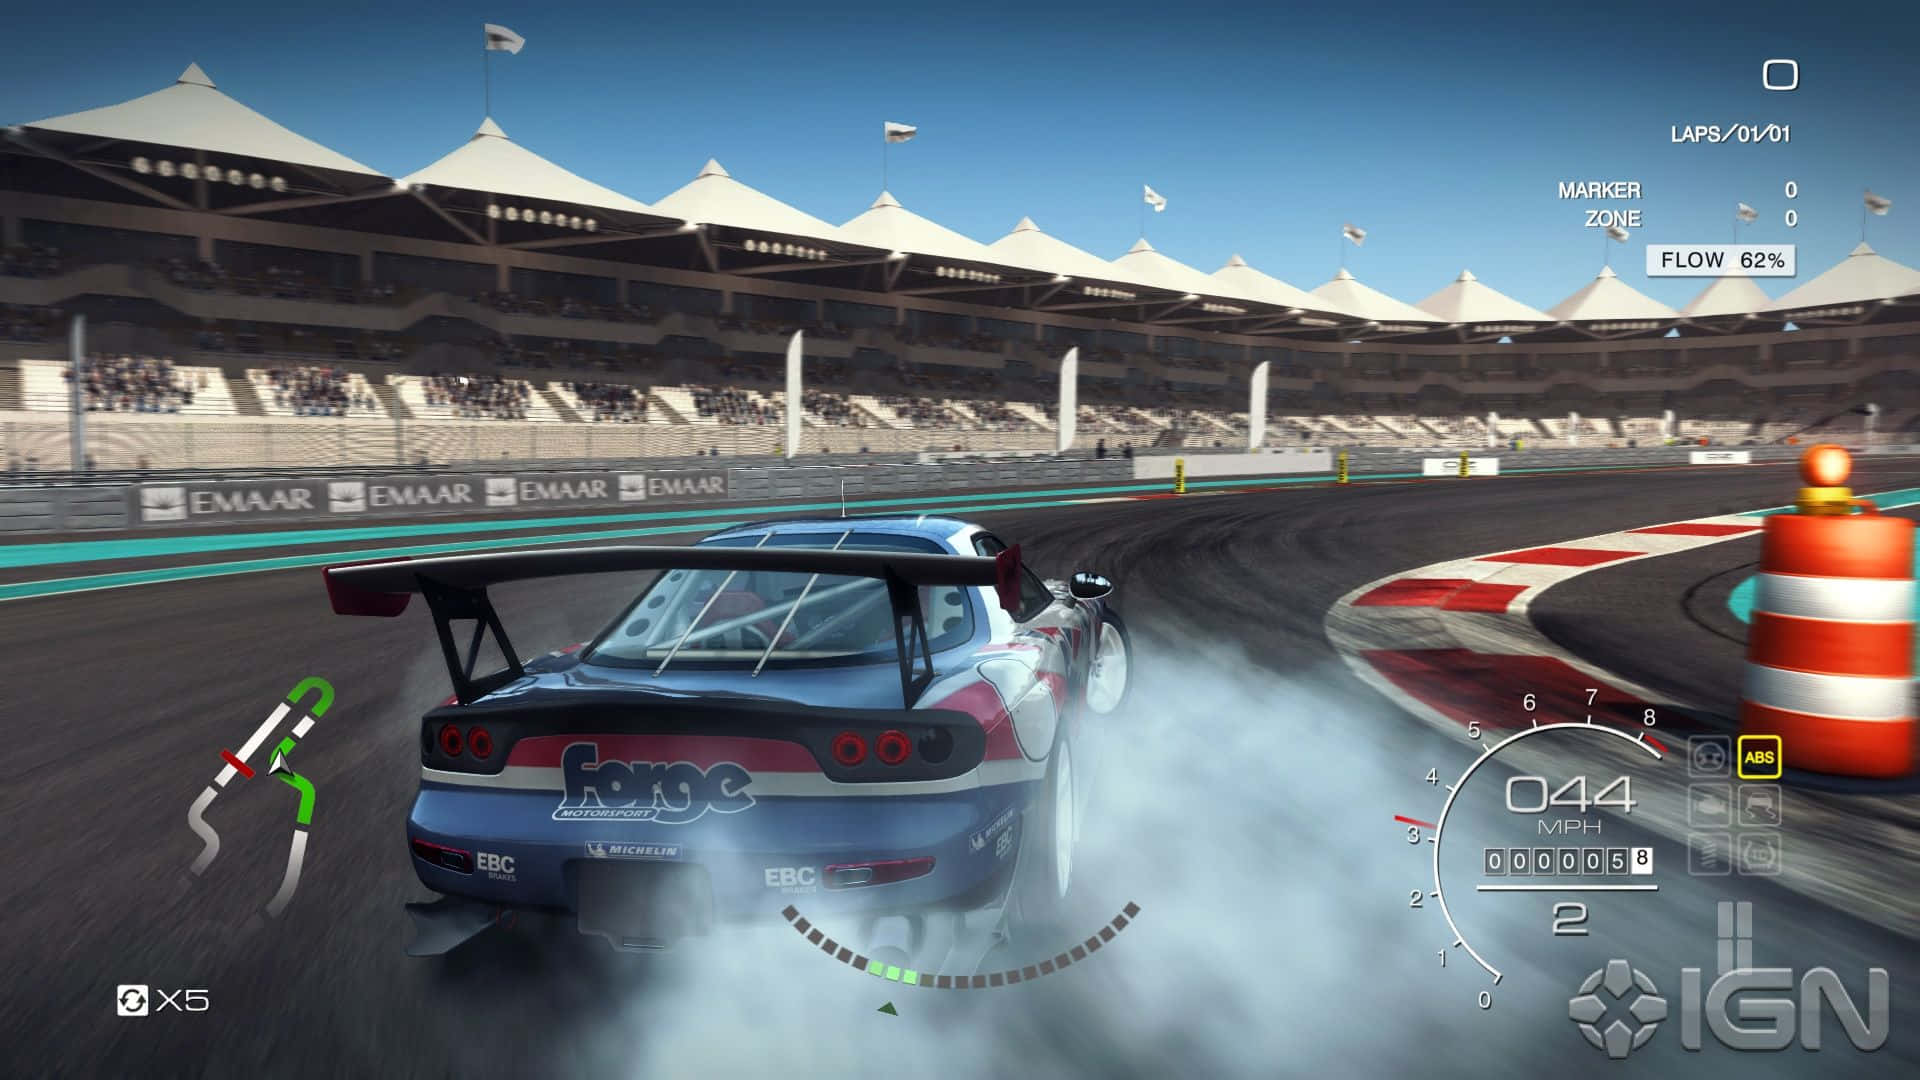 Race through the competition with Grid Autosport